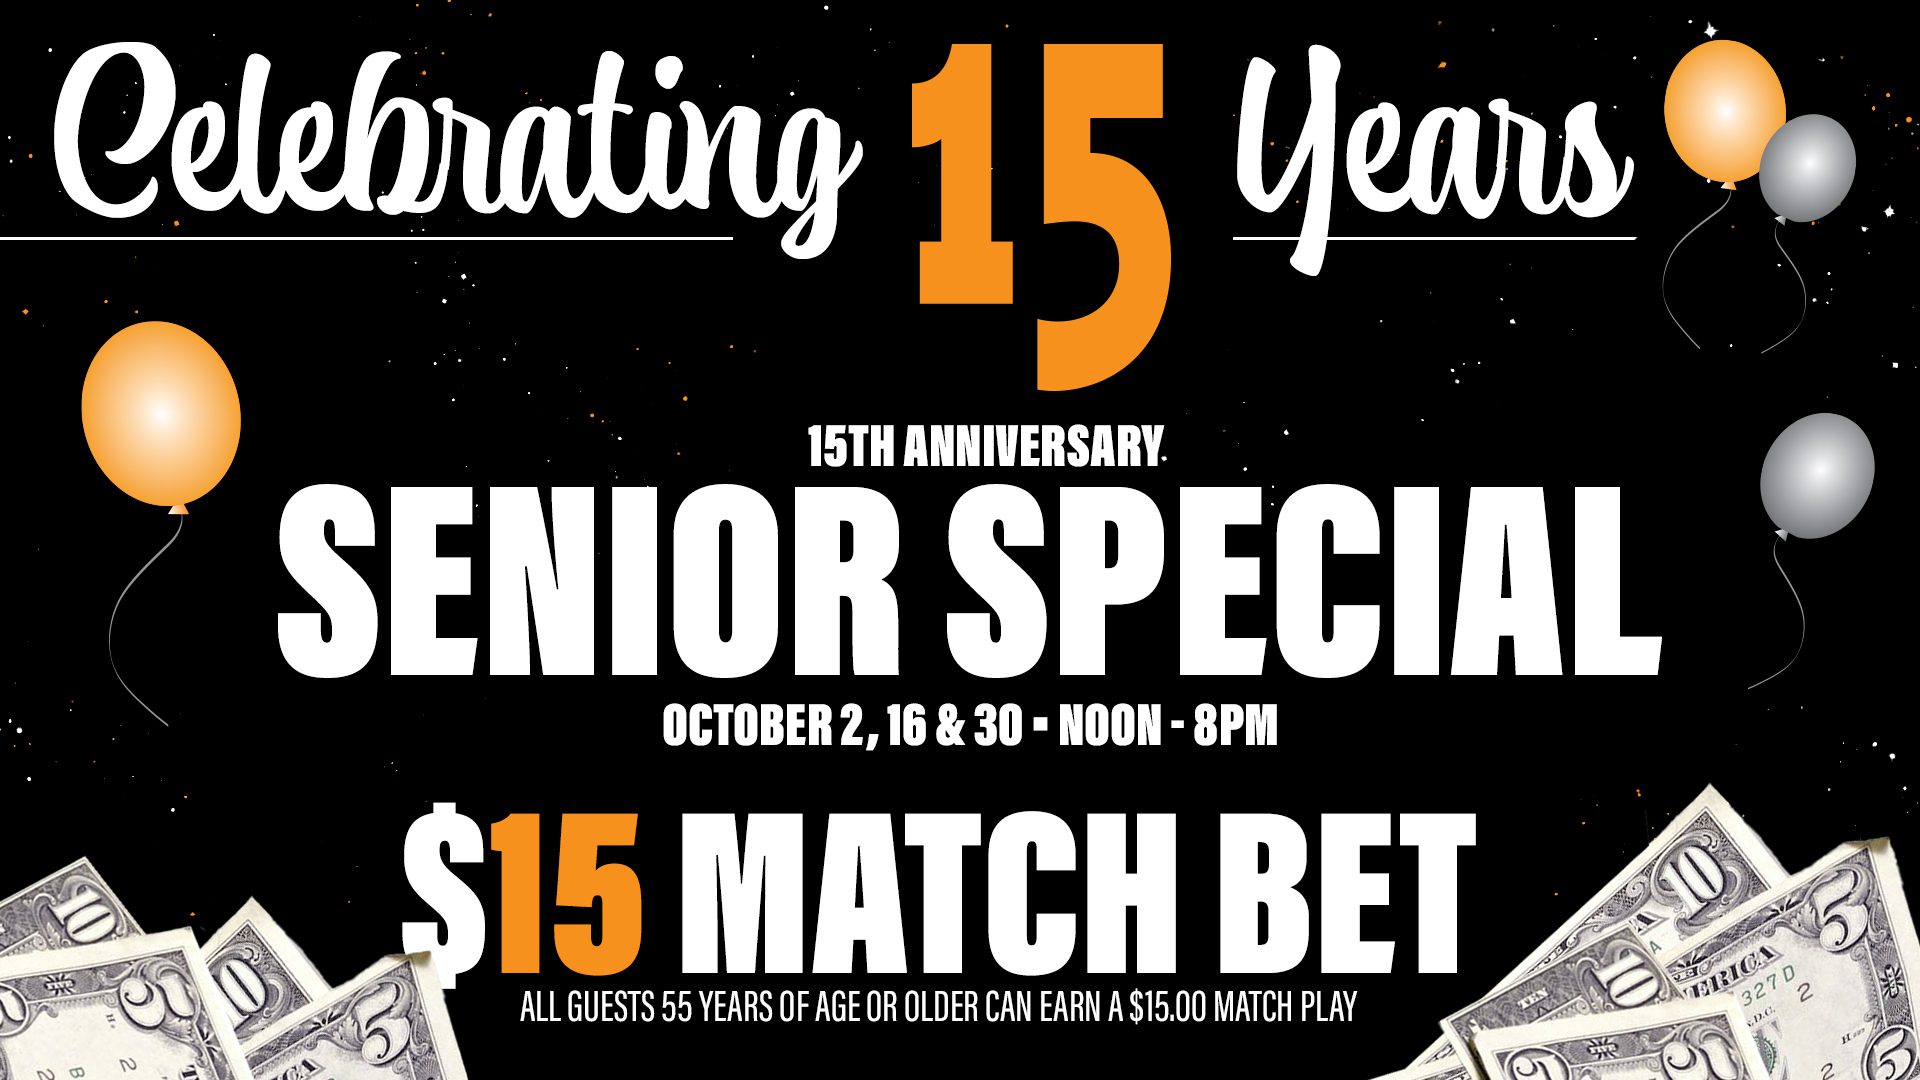 Announcement for a 15th anniversary celebration featuring a senior special with a $15 match bet offer.